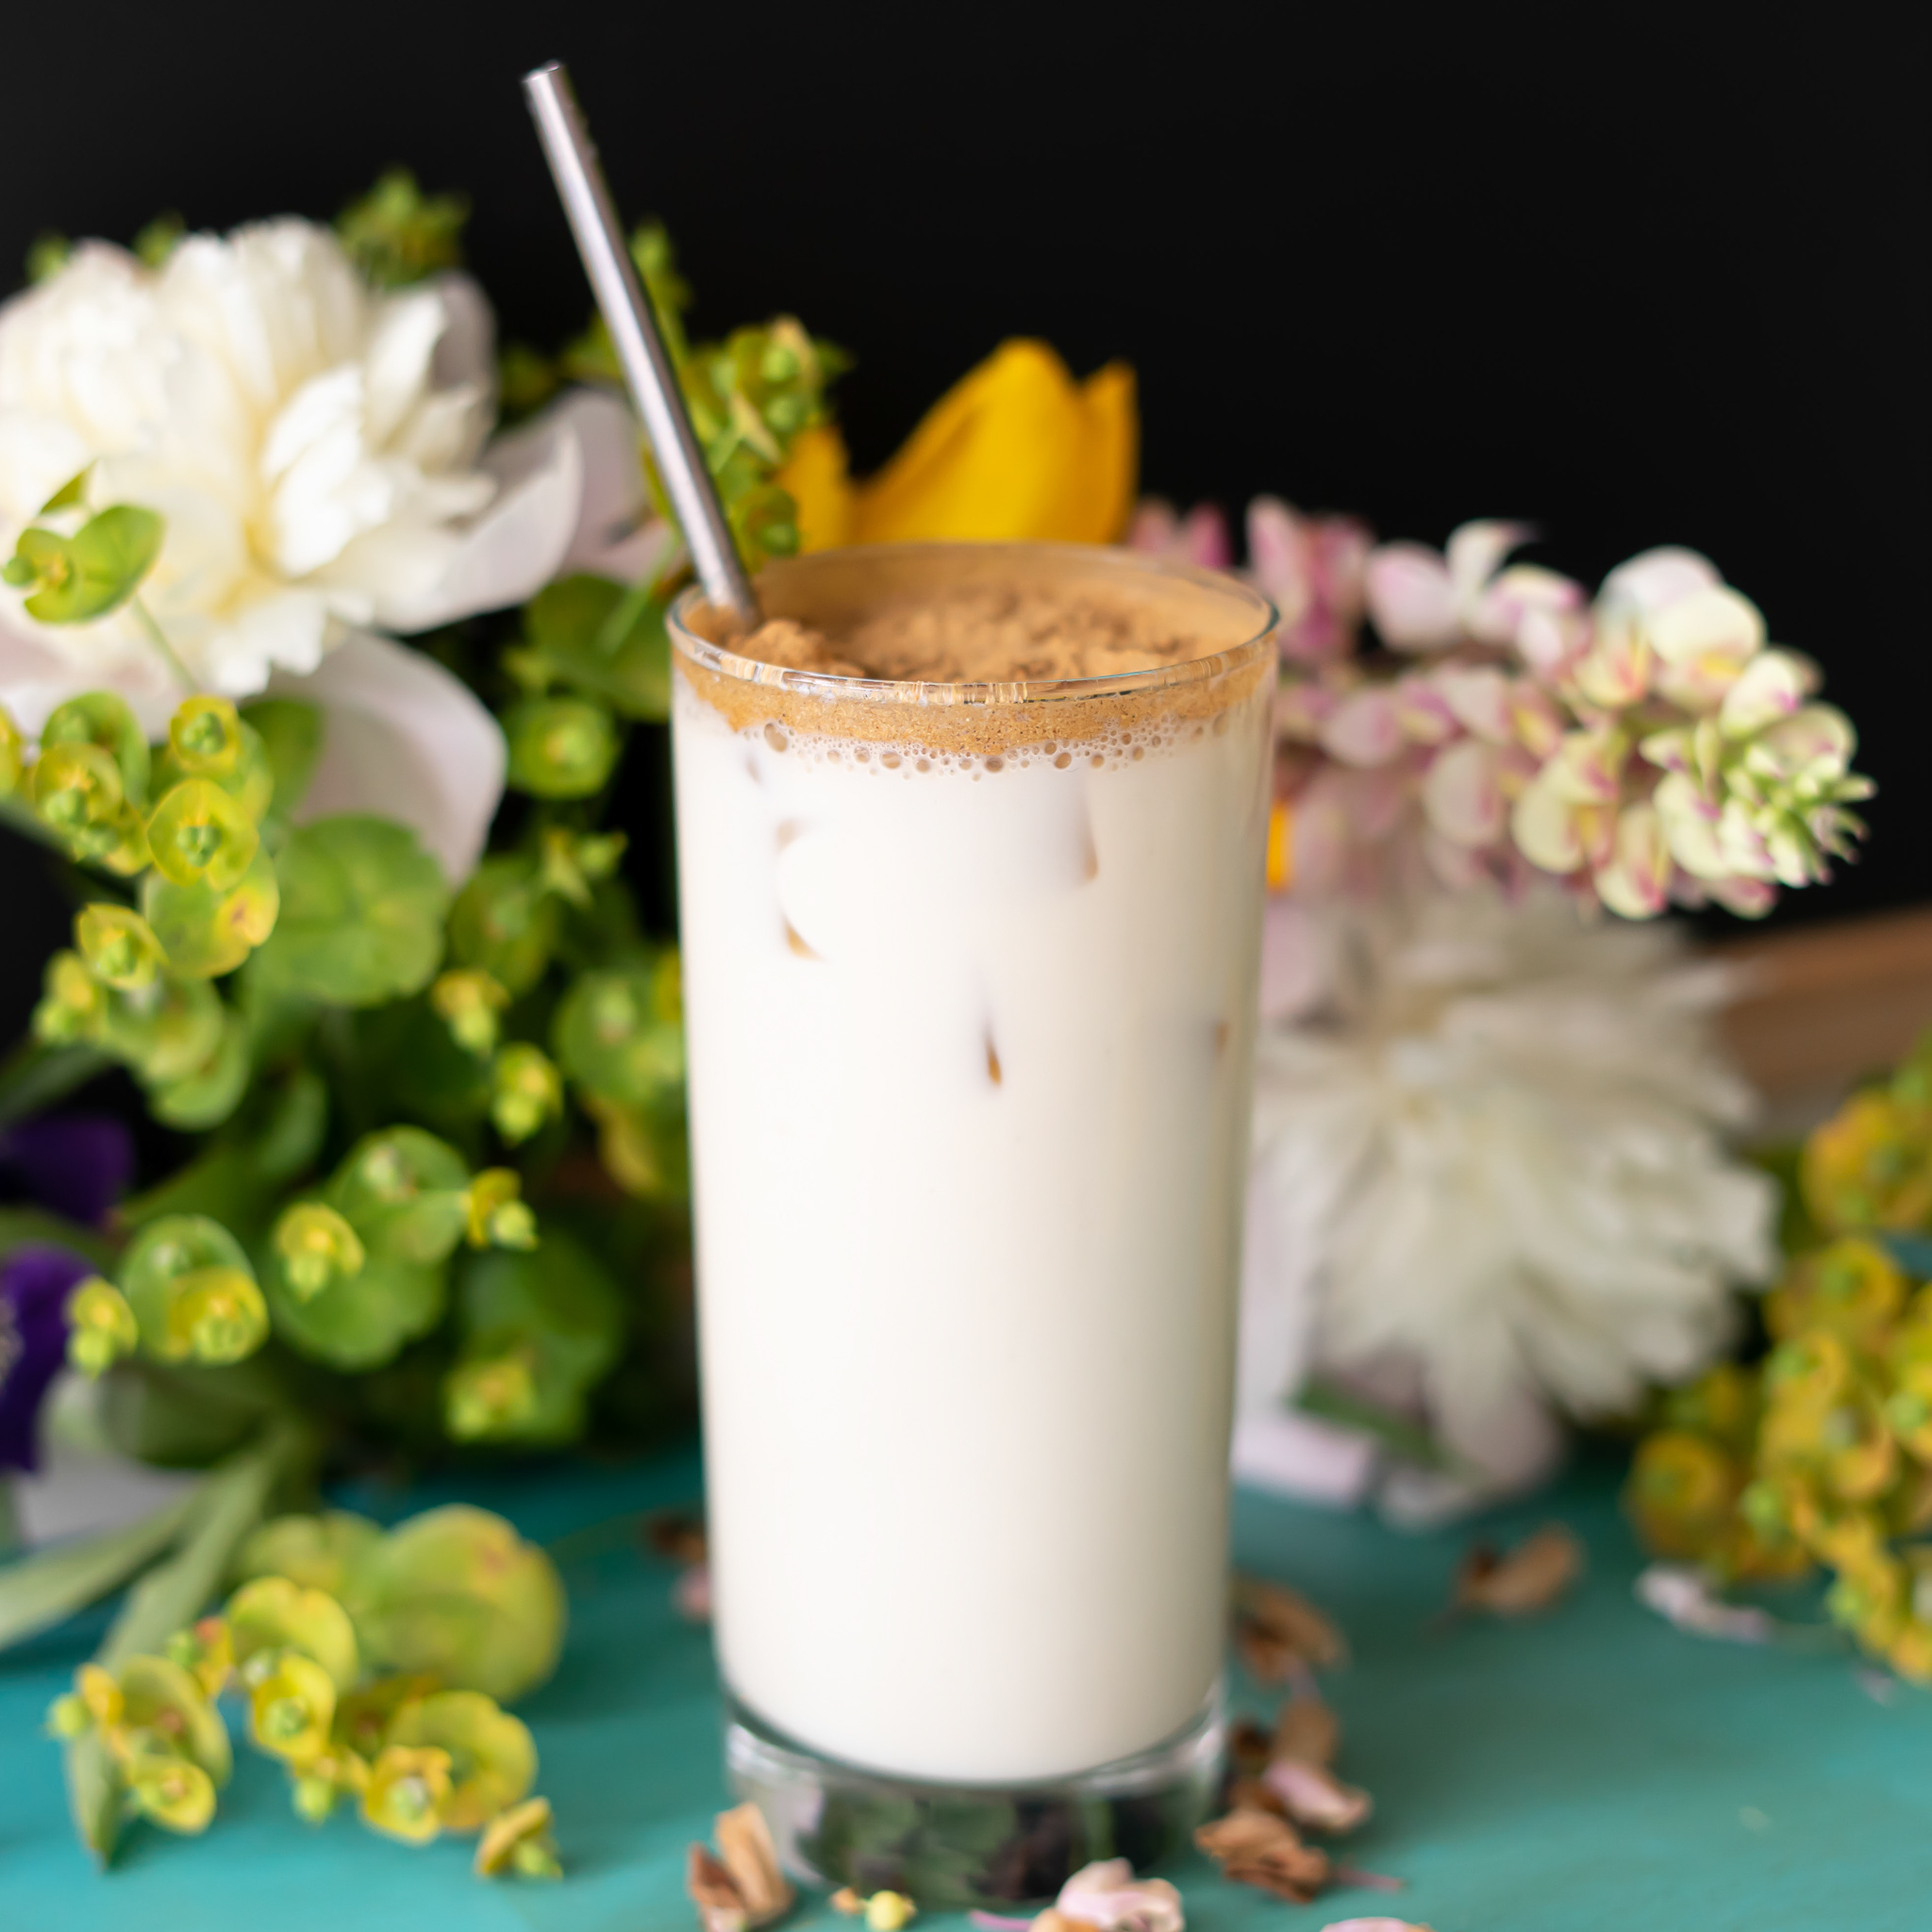 A milky white iced tea late in a tall slim glass sits against a floral background.